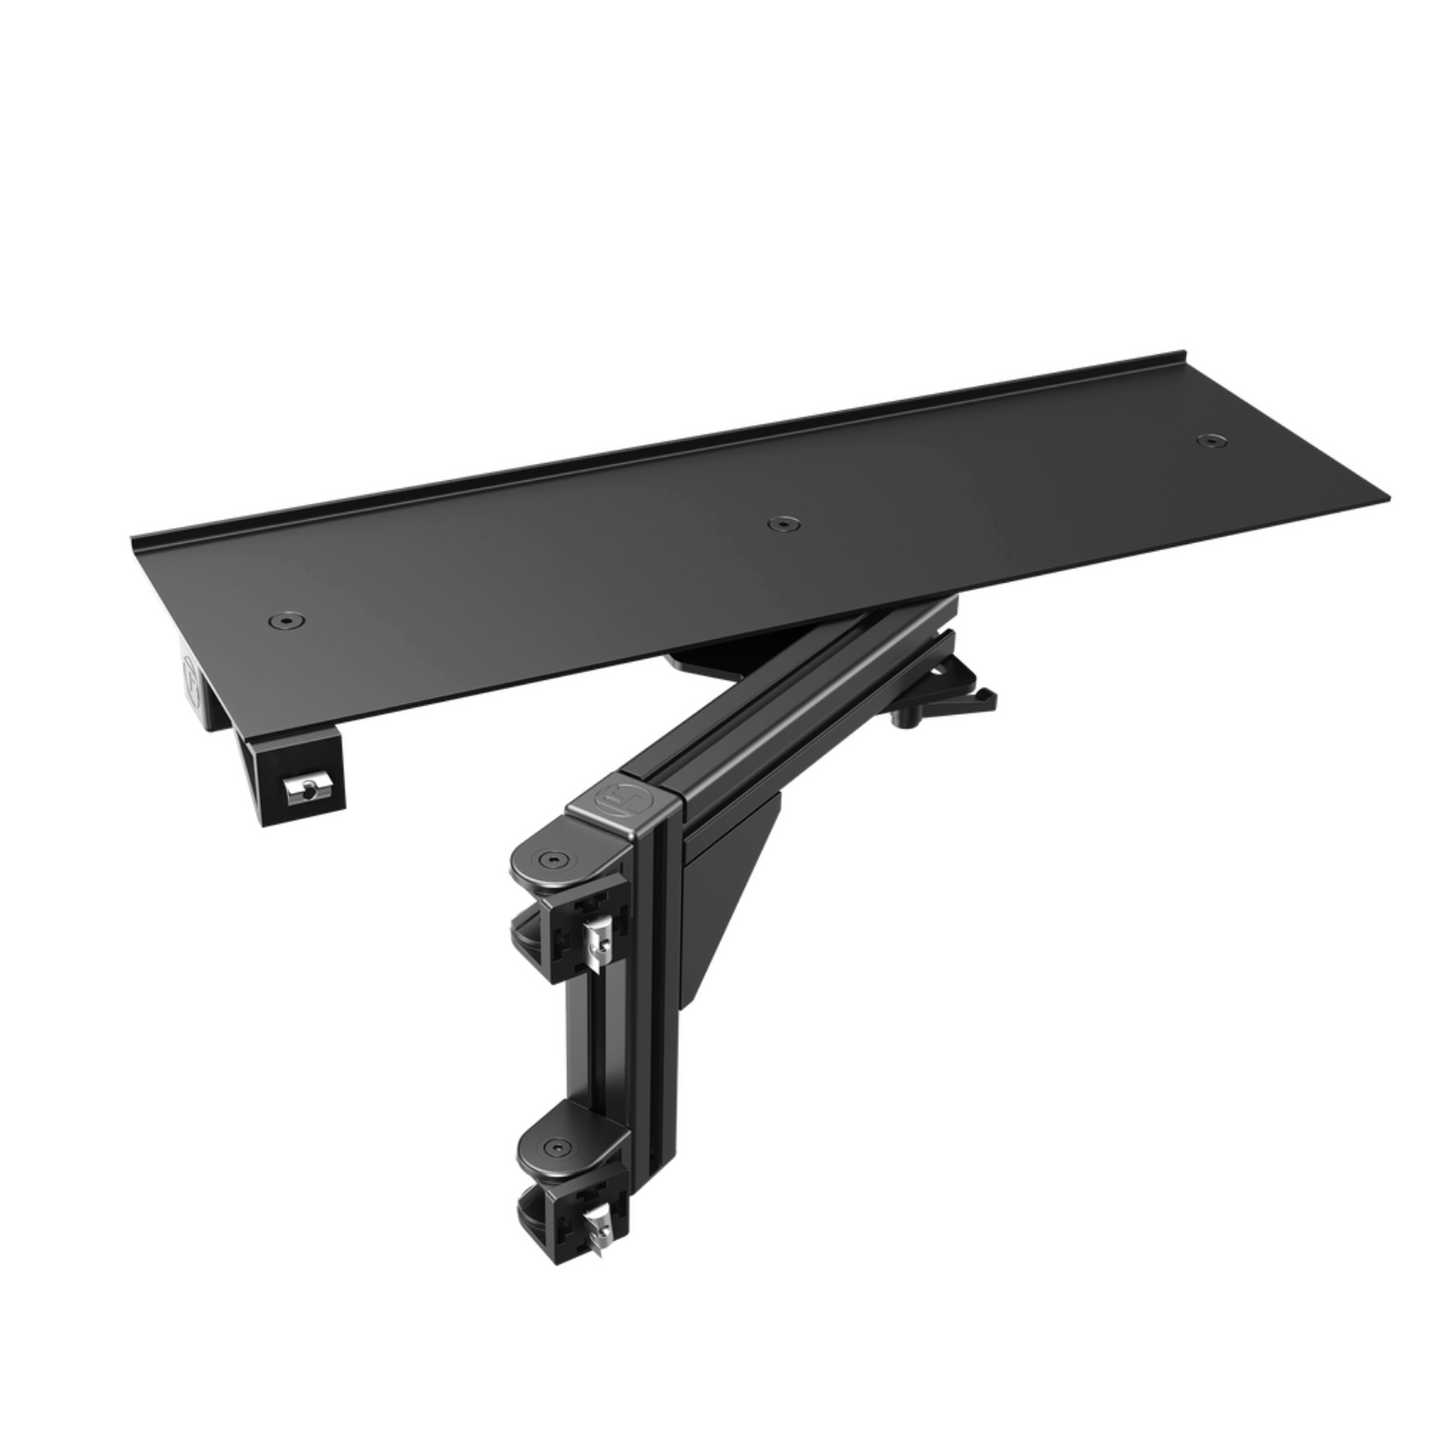 Trak Racer TR8020 650x200mm Desk Top and Frame with Swing Arm